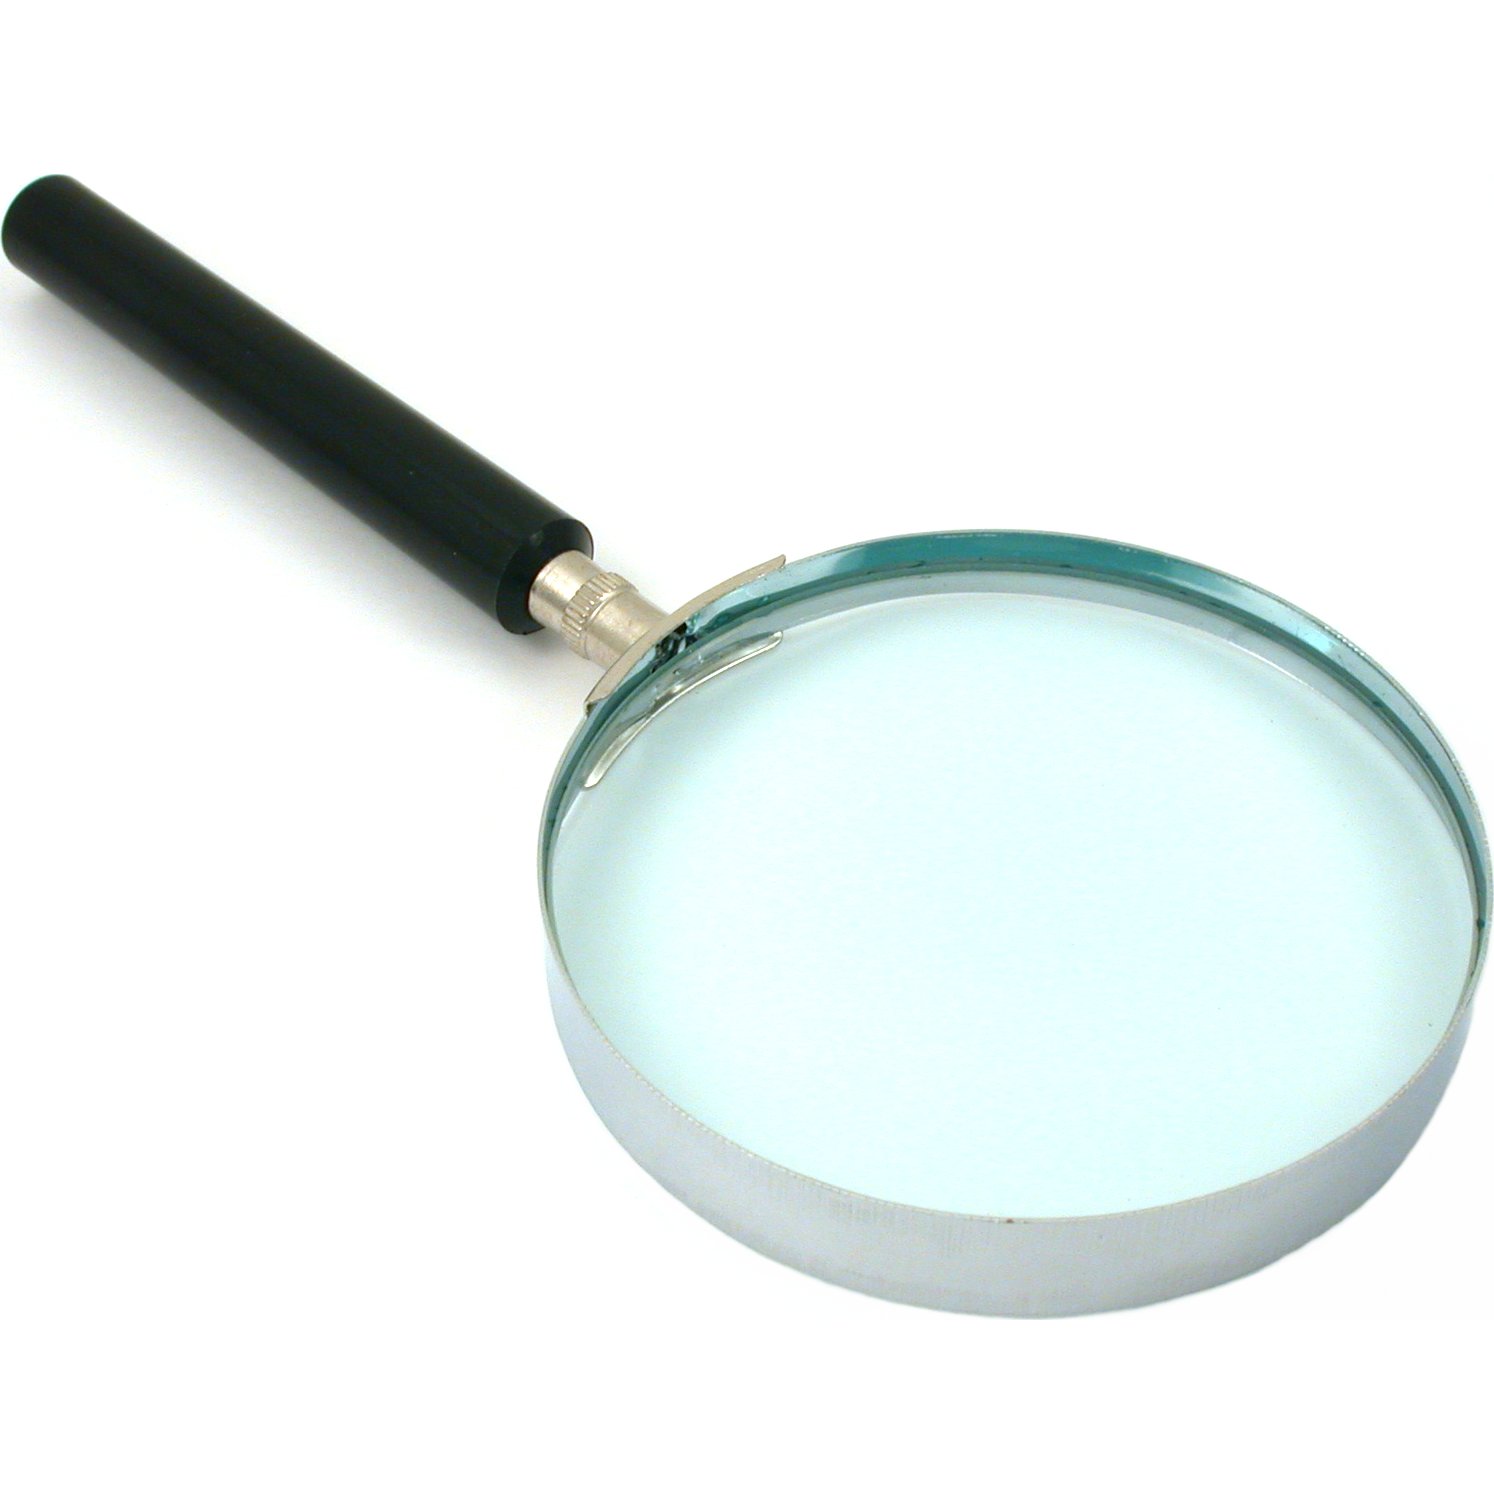 Findingking 3" 3x Magnifying Glass for Maps, Stamps and Coins